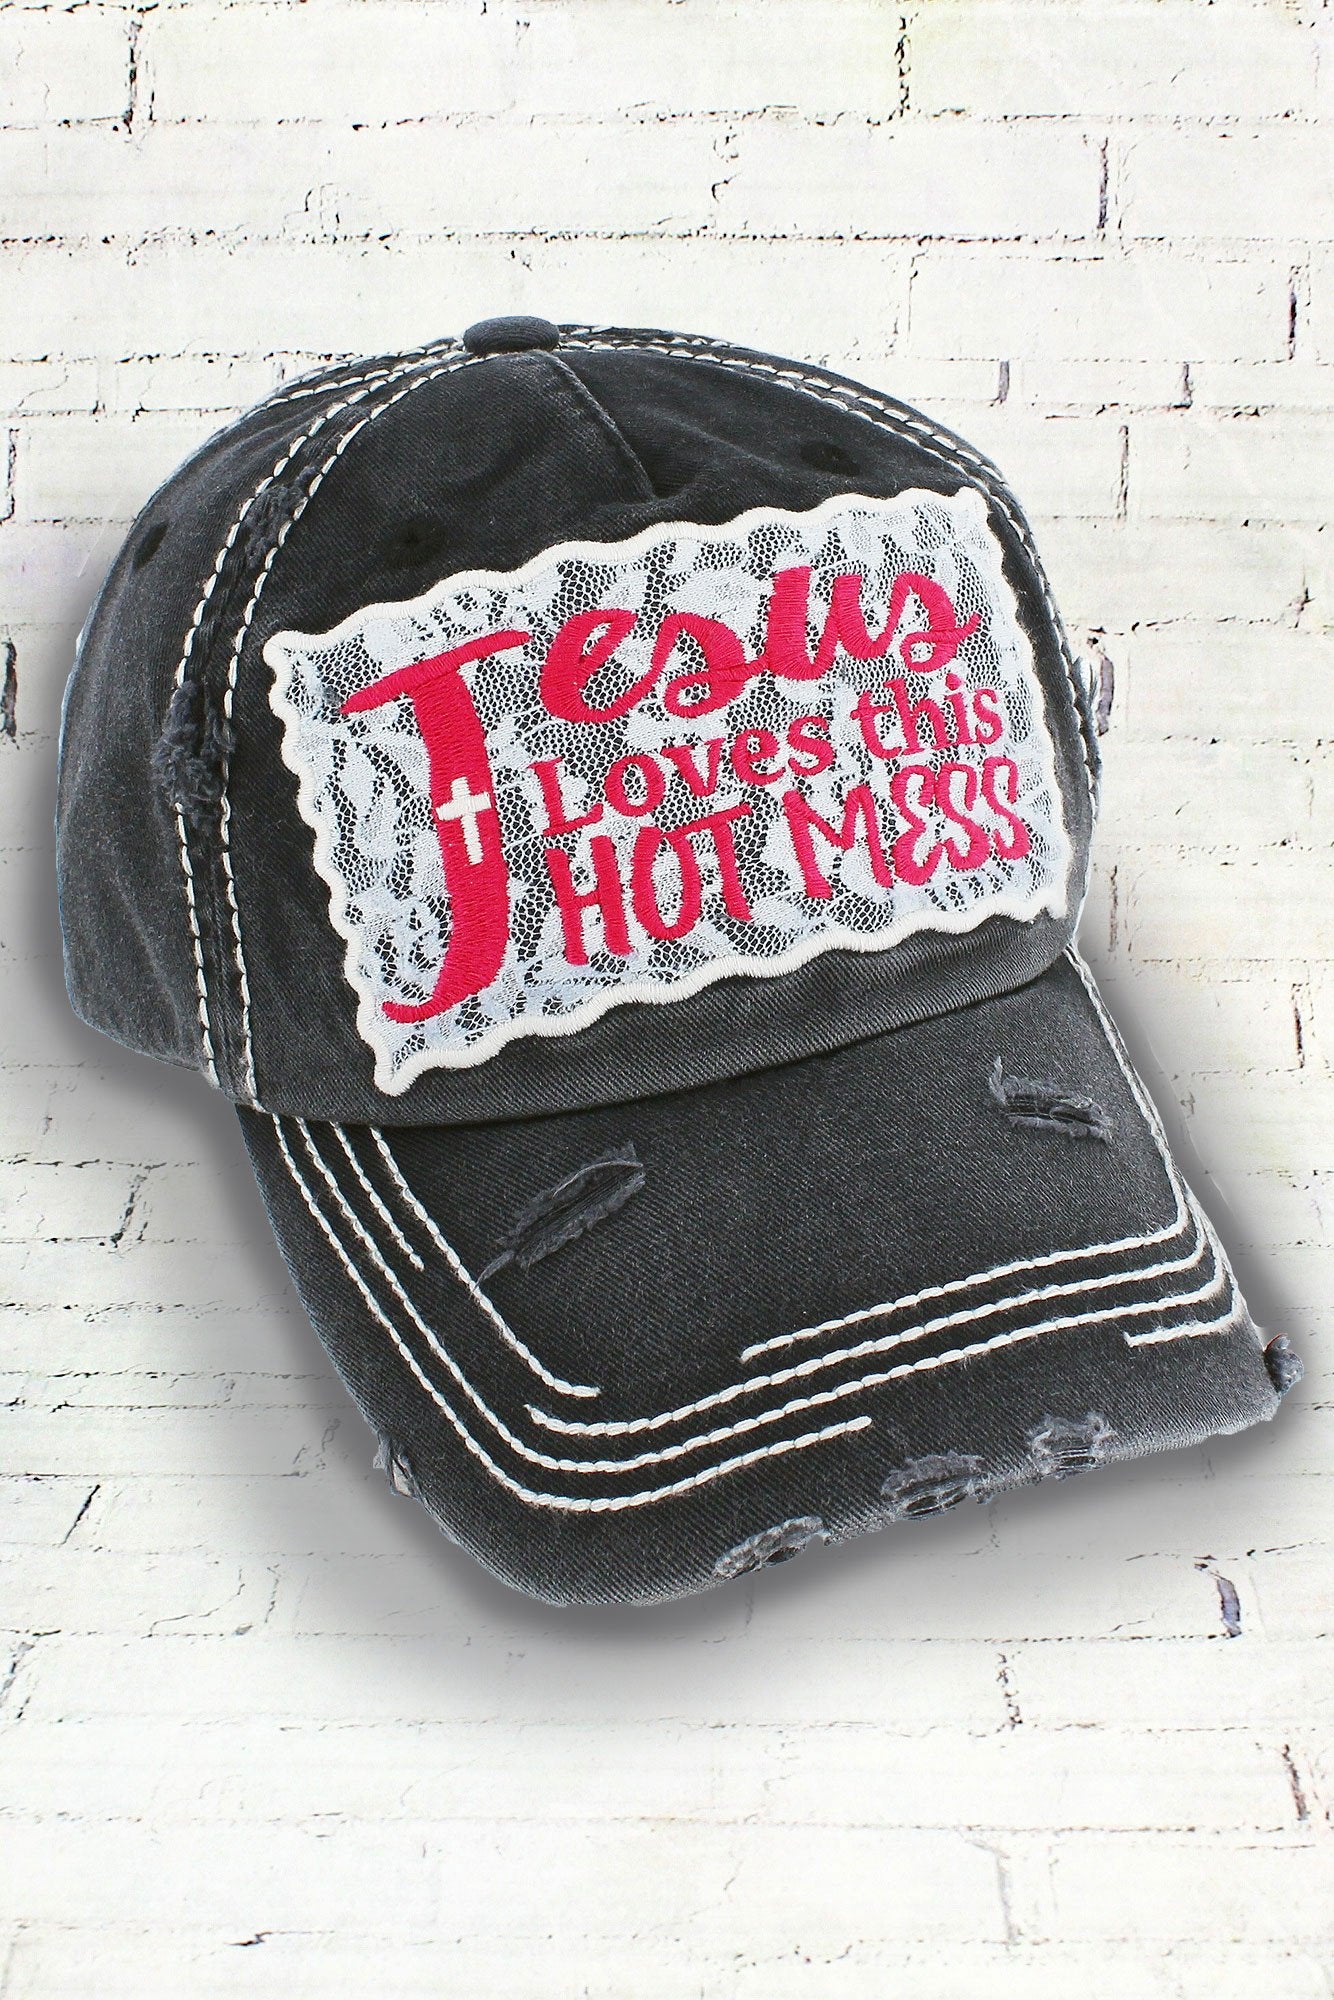 Jesus Loves this Hot mess  Hat !